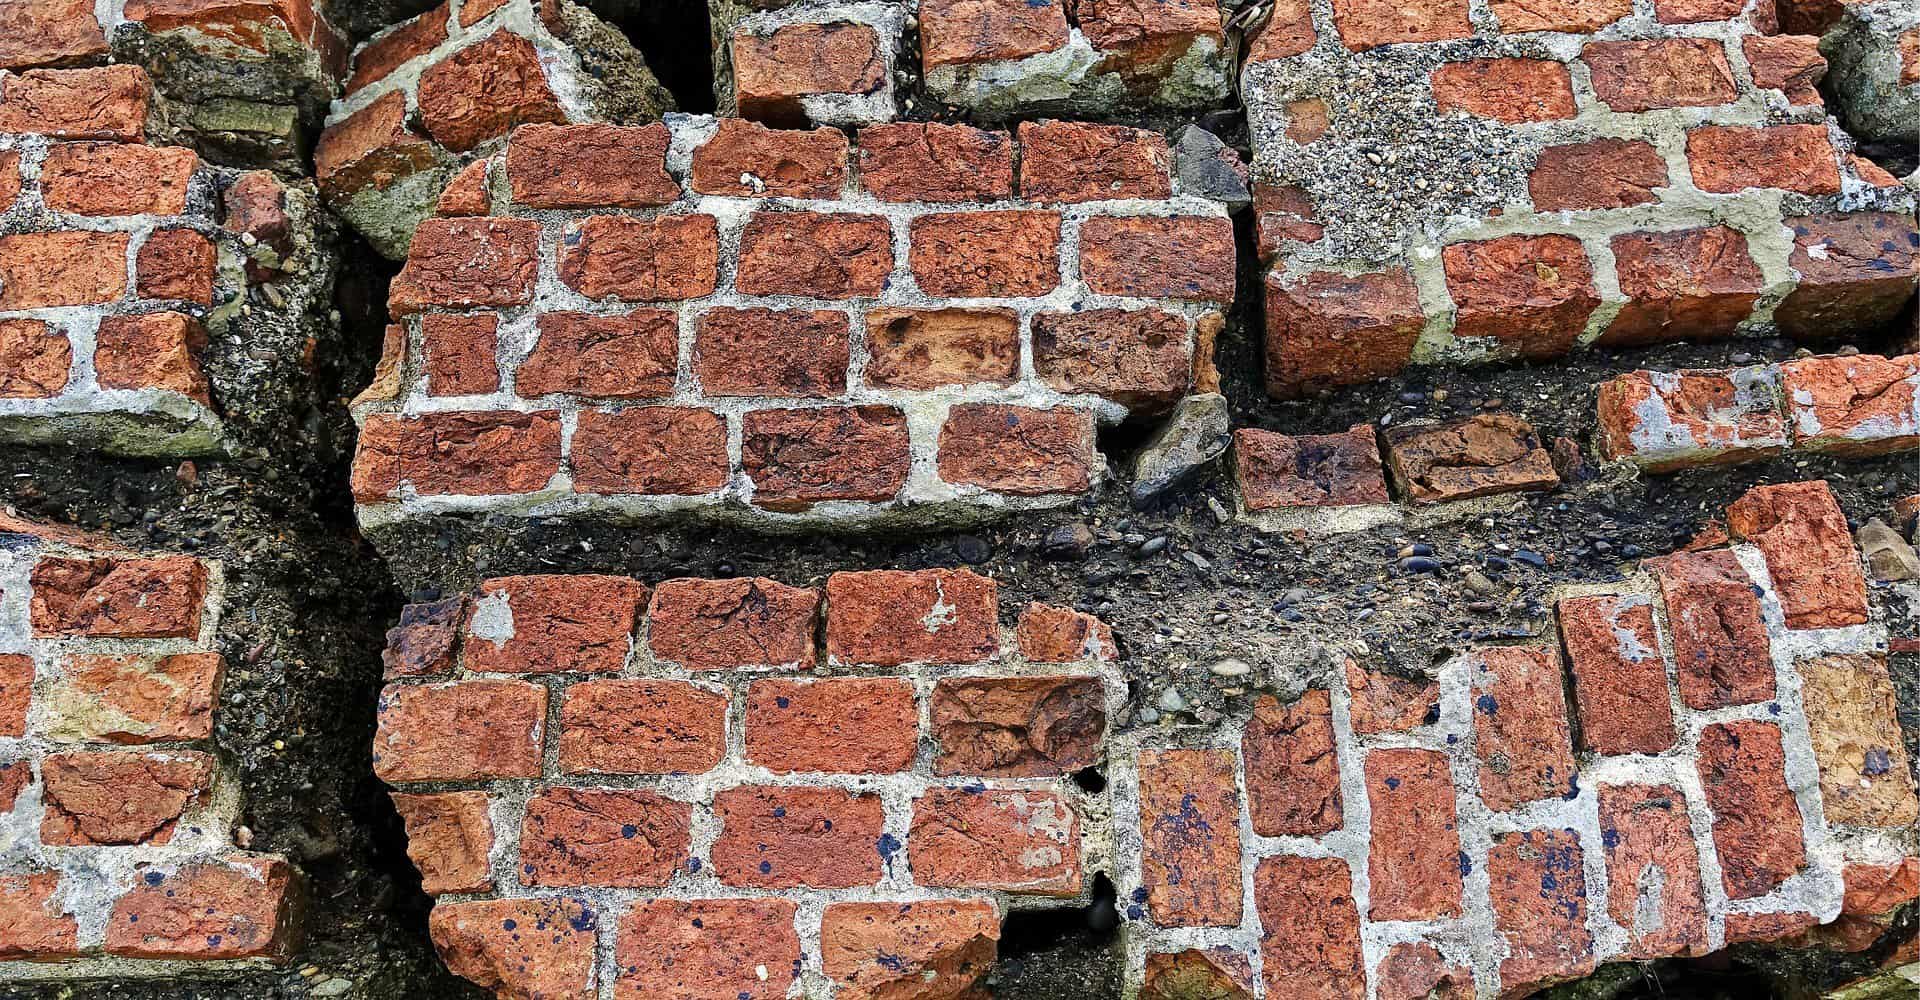 The remains of a brick structure are shown via large chunks of mortared bricks.